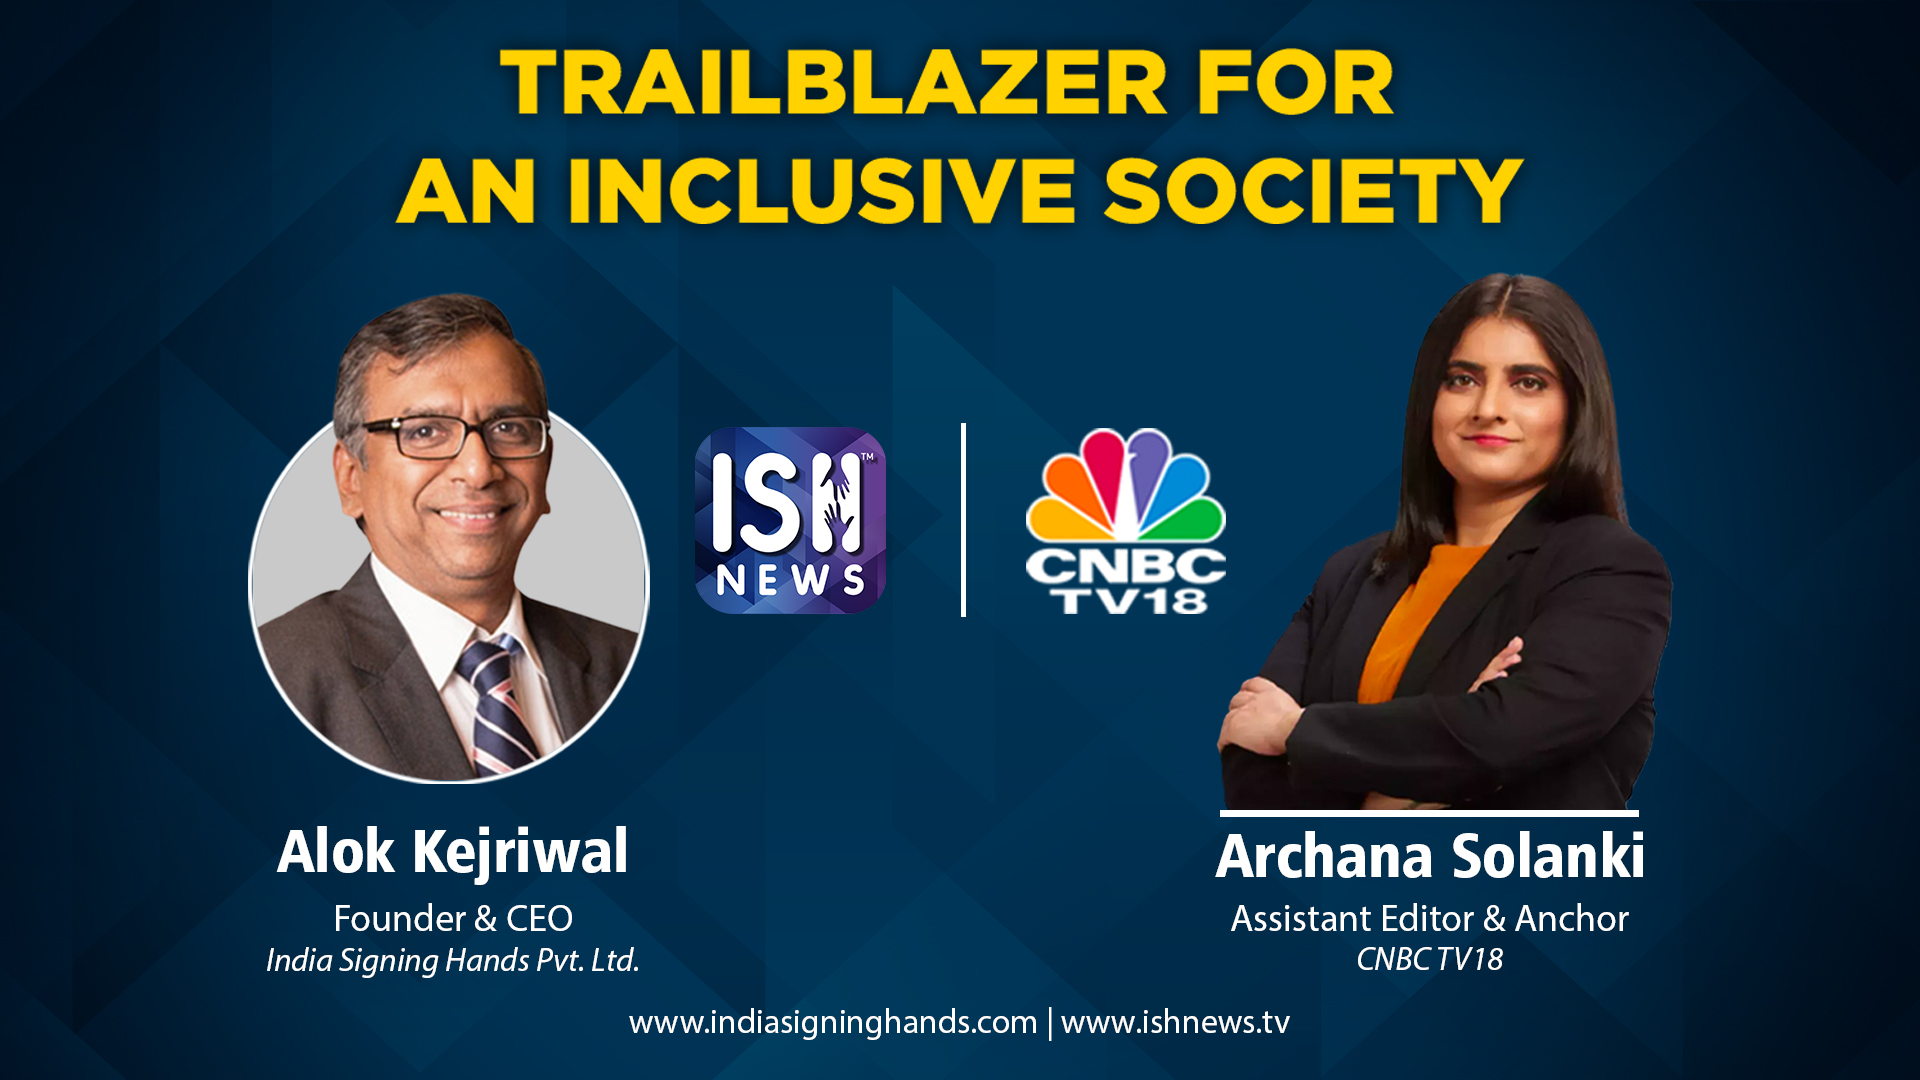 CNBC Interview with Alok Kejriwal and Archana Solanki